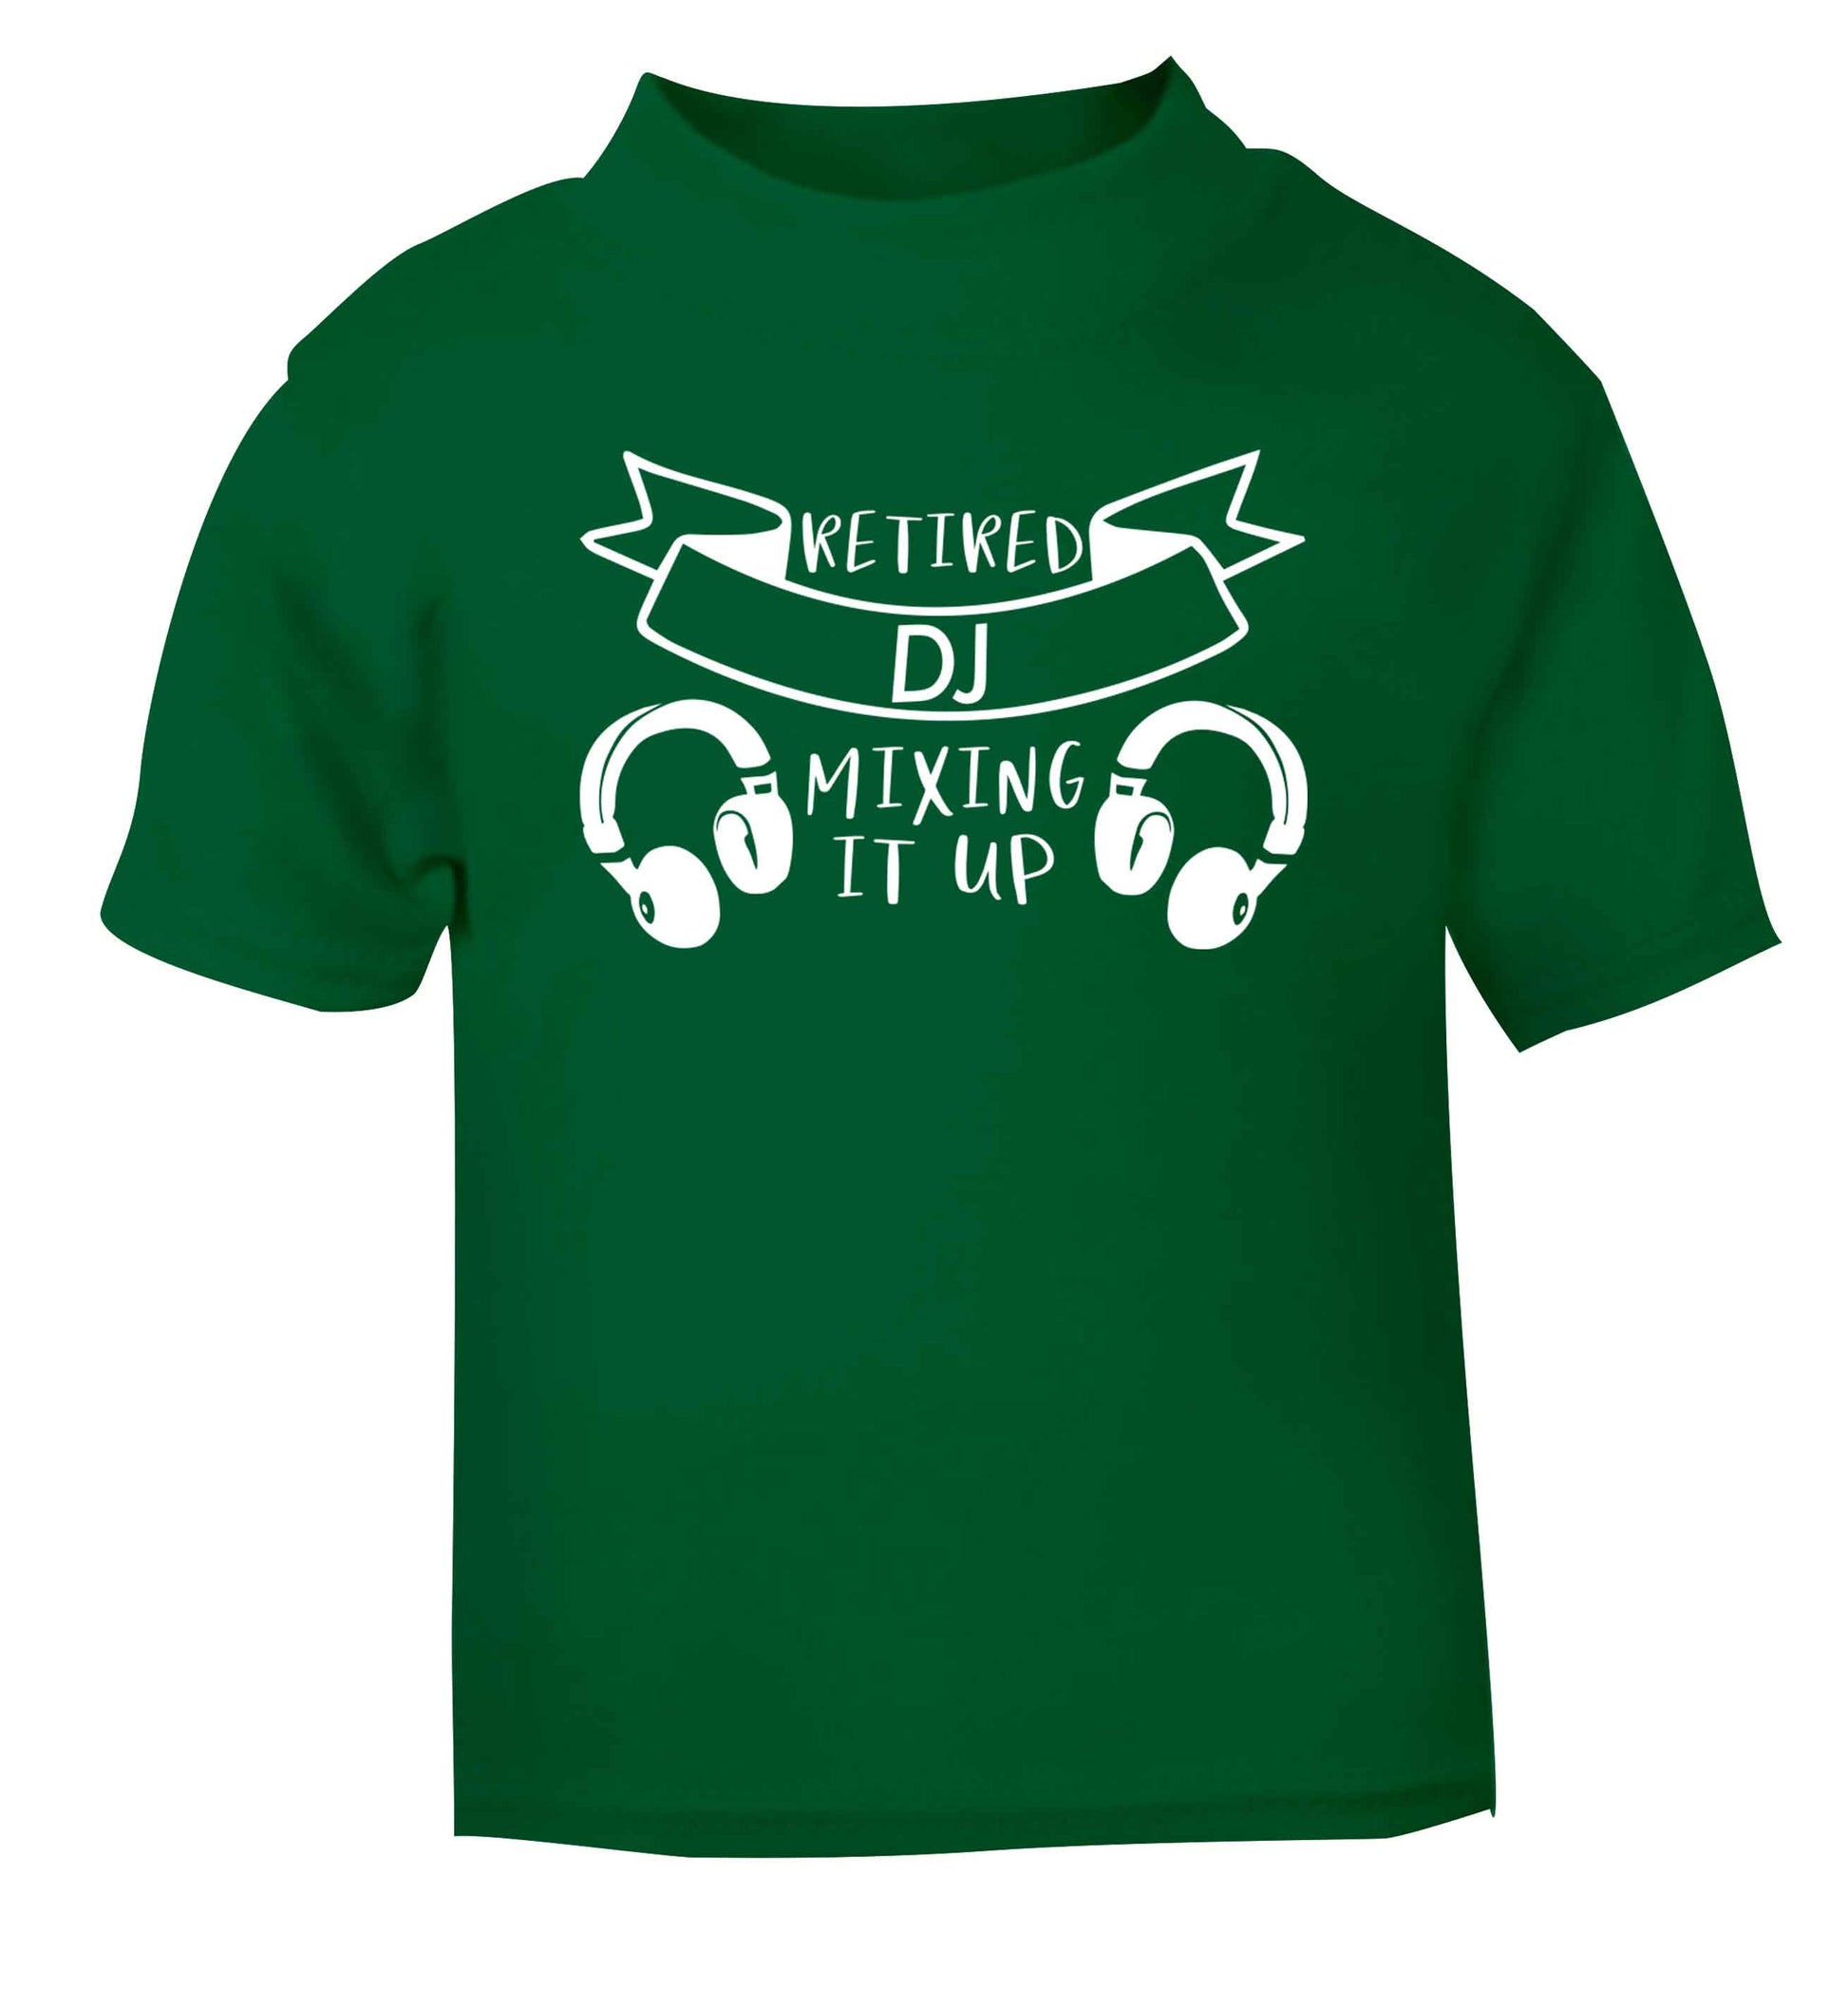 Retired DJ mixing it up green Baby Toddler Tshirt 2 Years